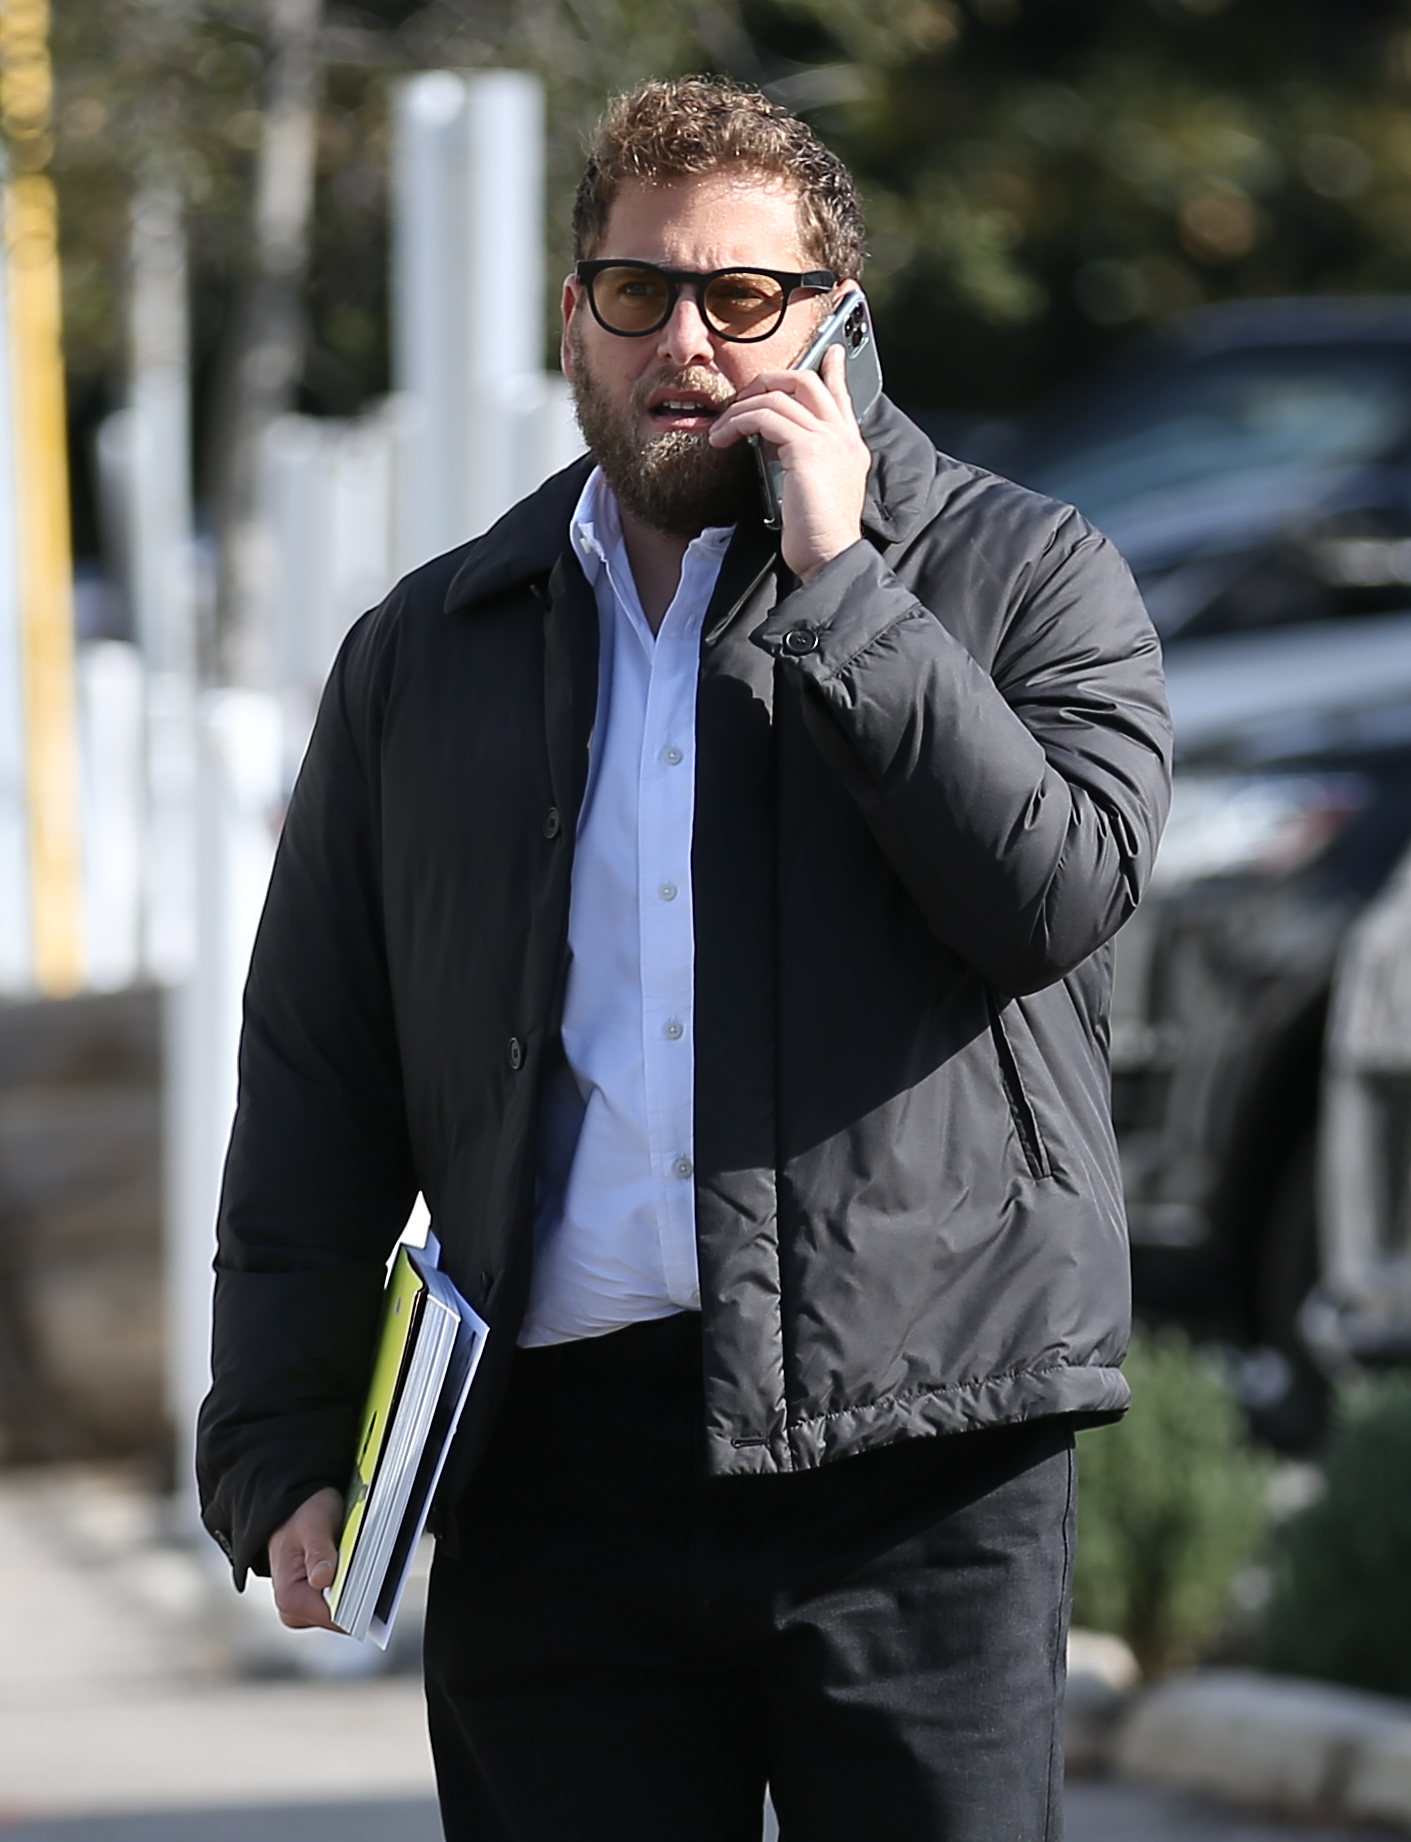 Jonah Hill walking outside while talking on the phone and holding a stack of papers